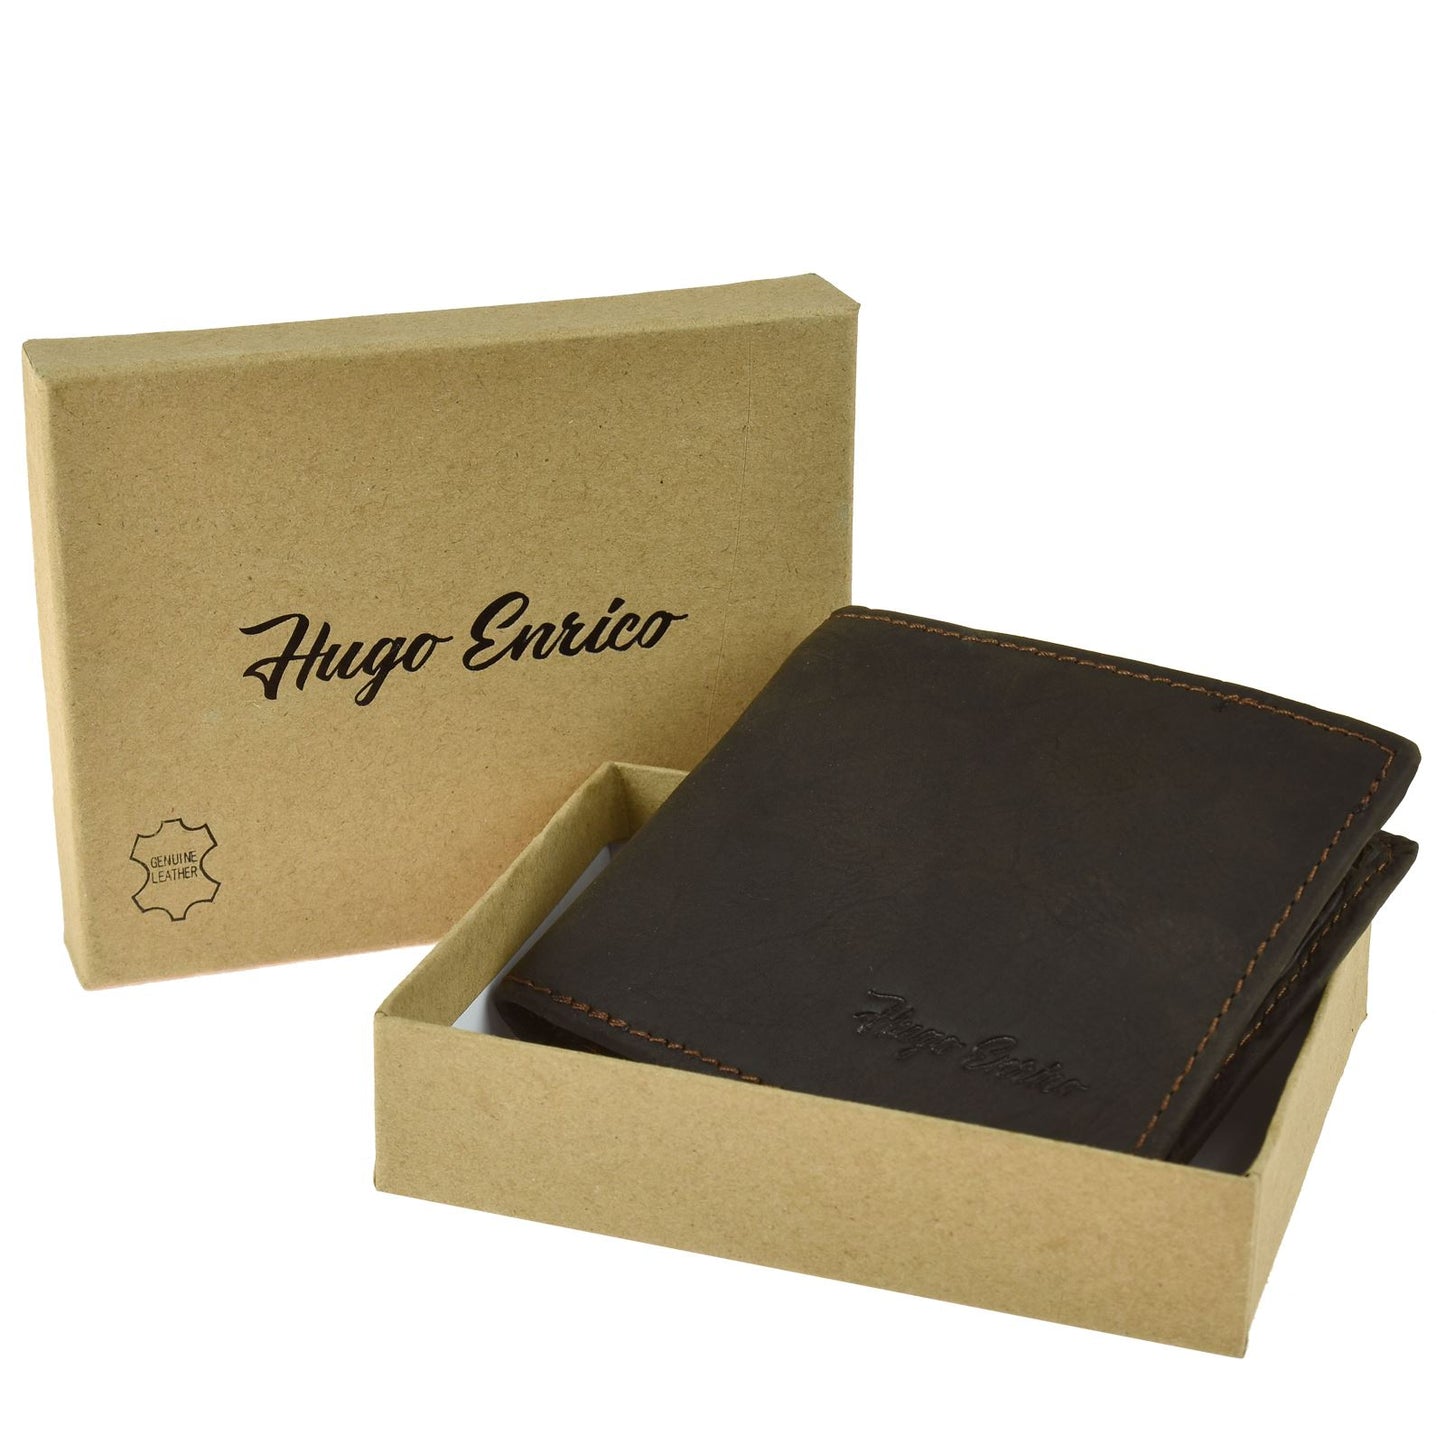 Keep Your Coins Organized with a Hugo Enrico Coin Pouch Wallet